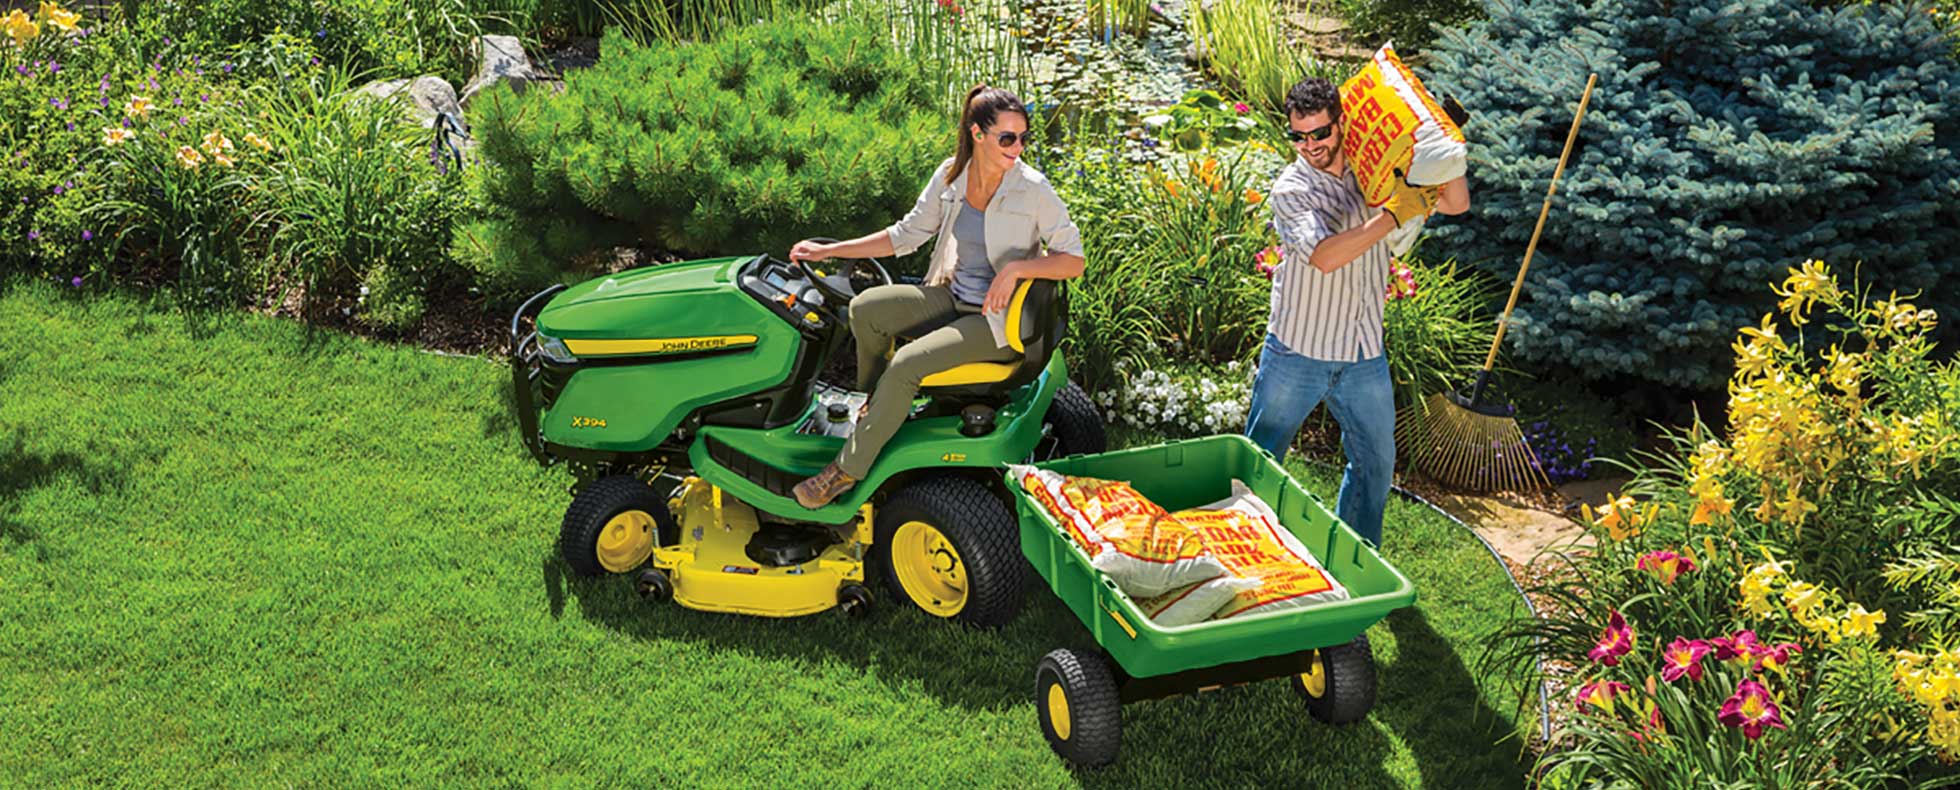 5 Lawn Mower Attachments That Are Perfect for Spring Yardwork